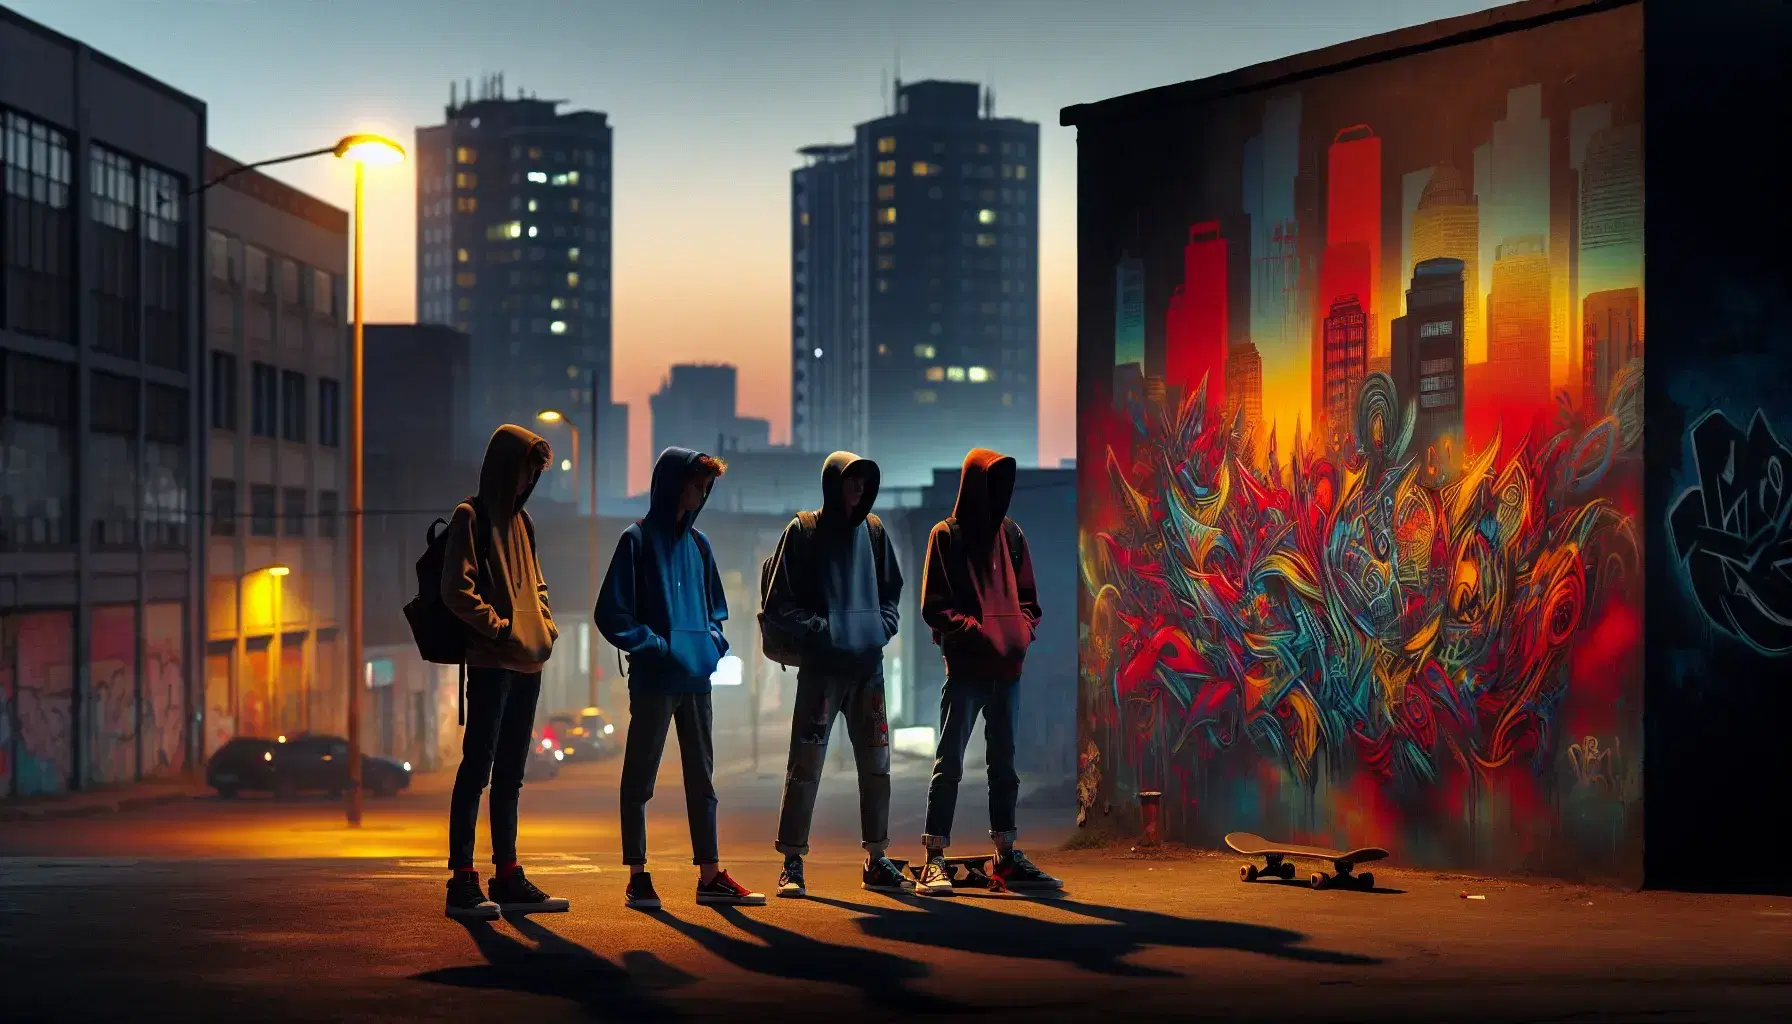 Three teenagers in casual clothes gather on an urban street at dusk, with colorful graffiti in the background and streetlights lit.